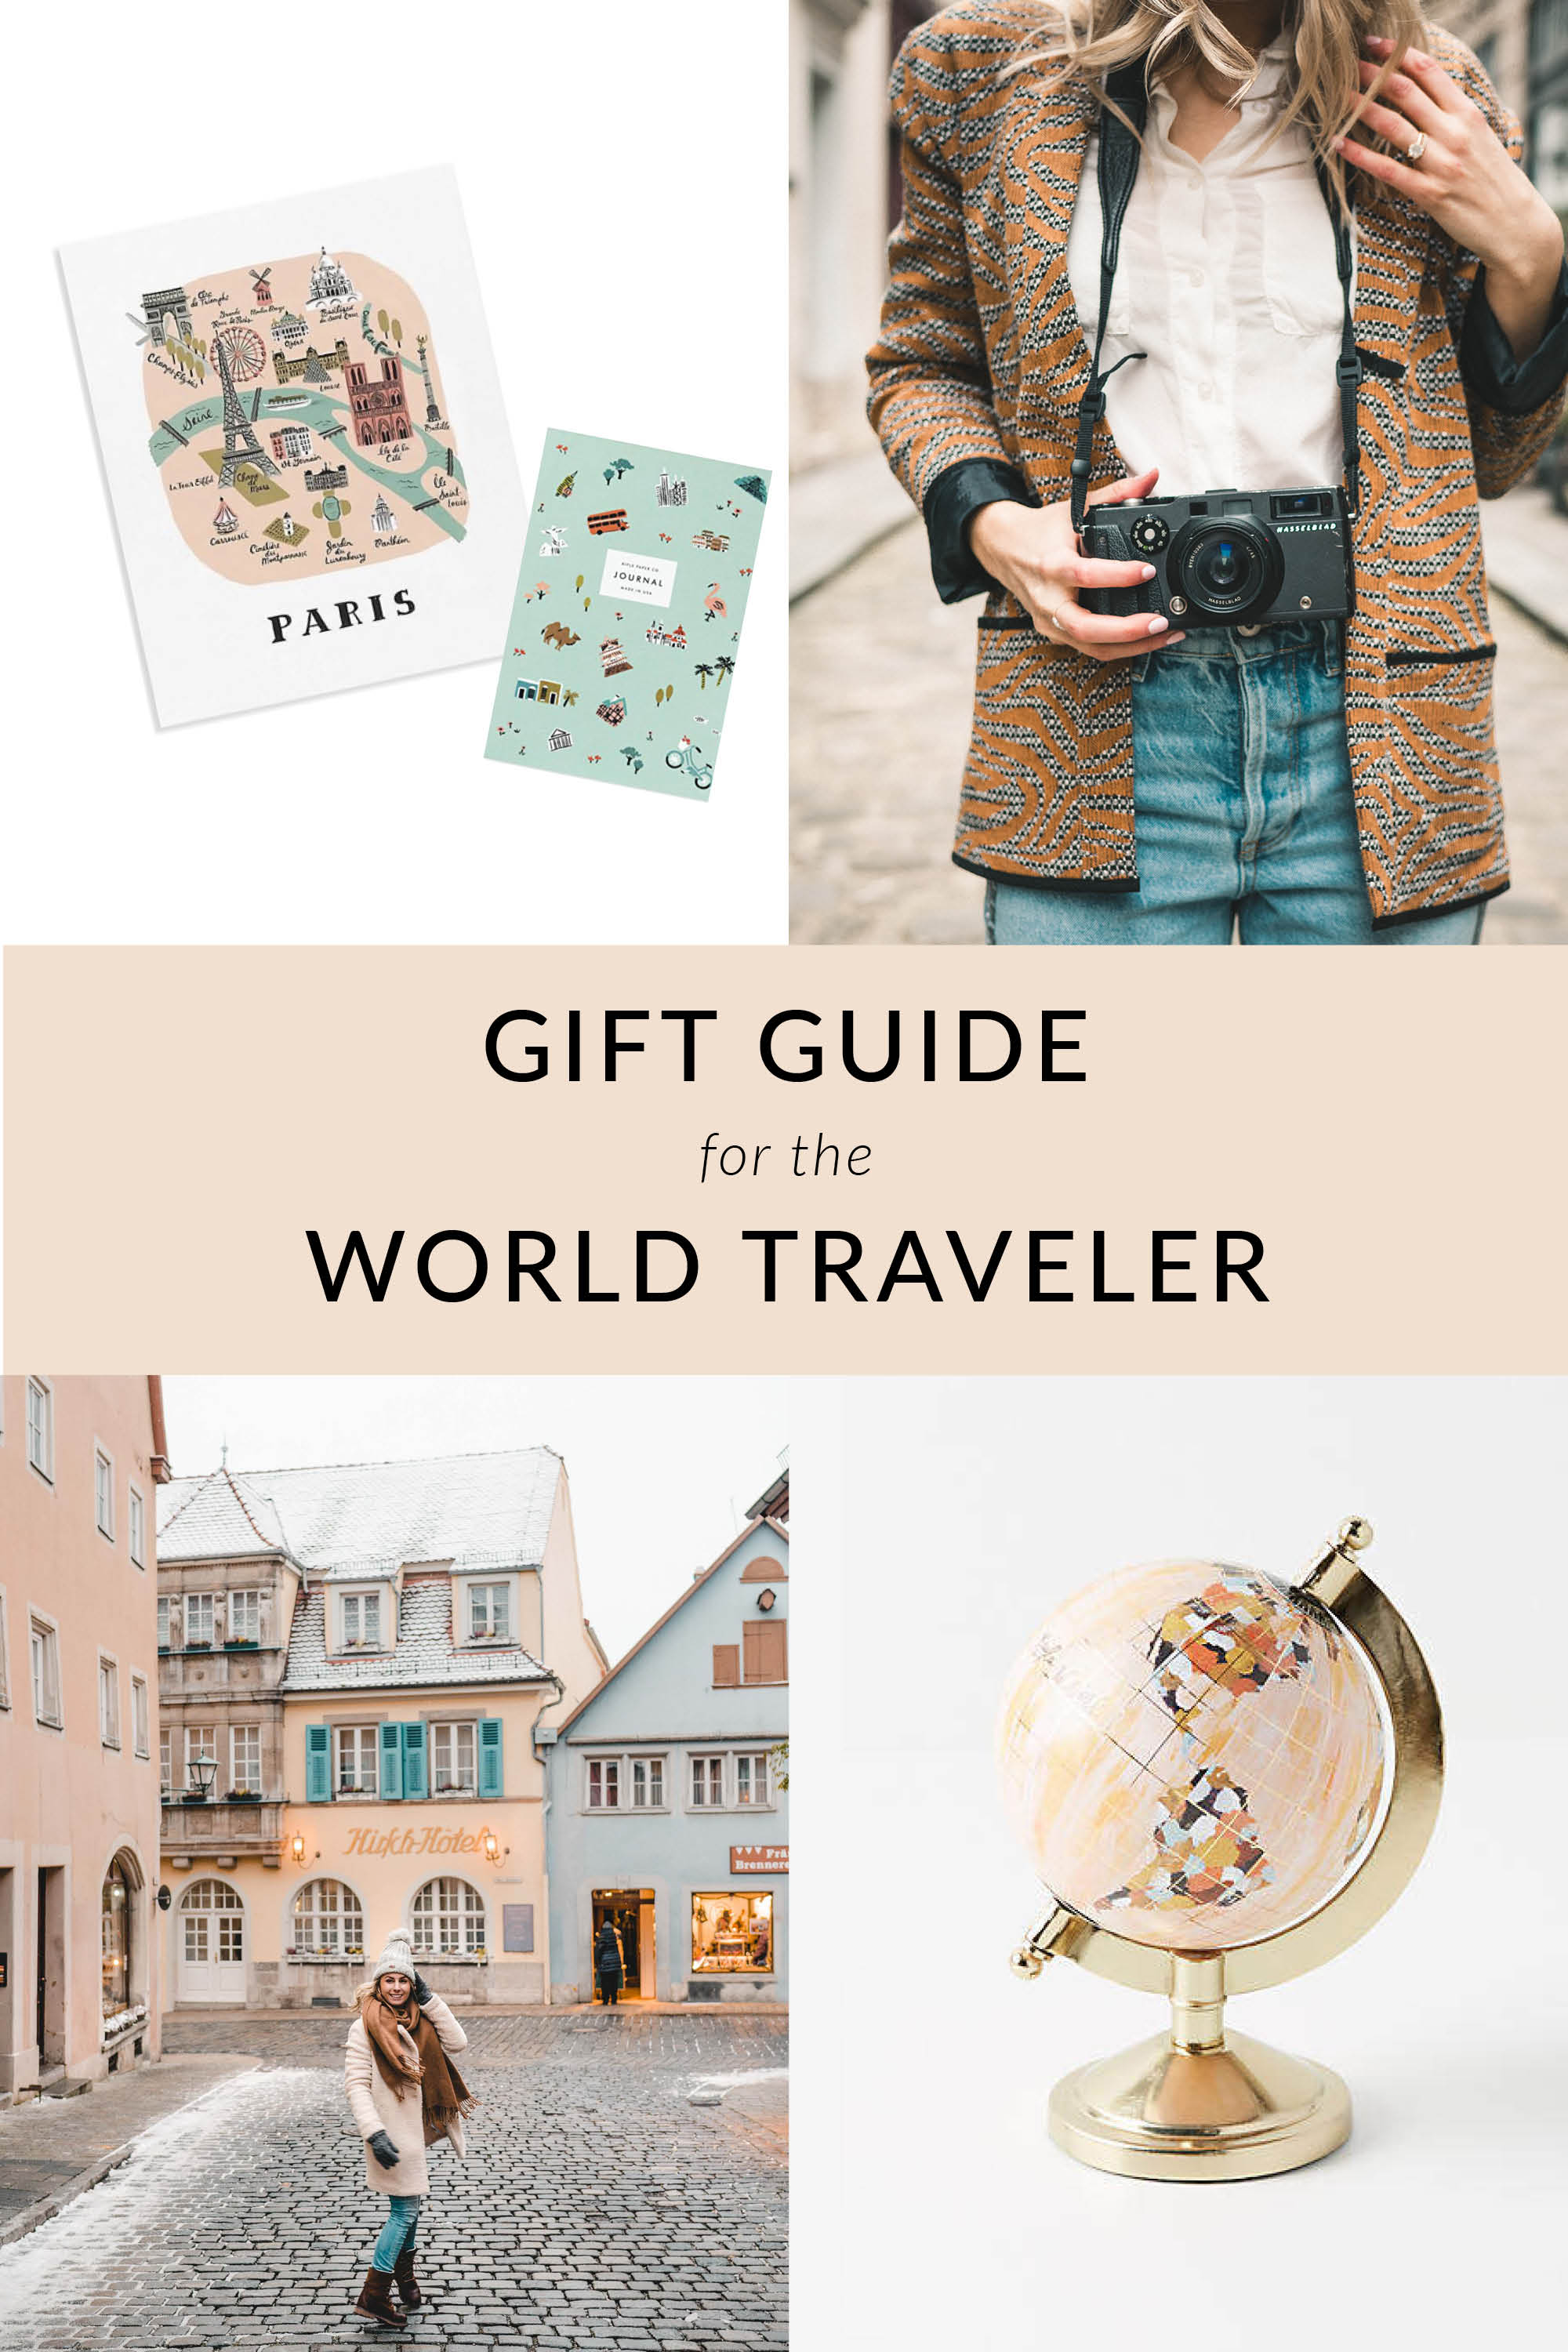 Gifts for the World Traveler | Gift Guide by Find Us Lost